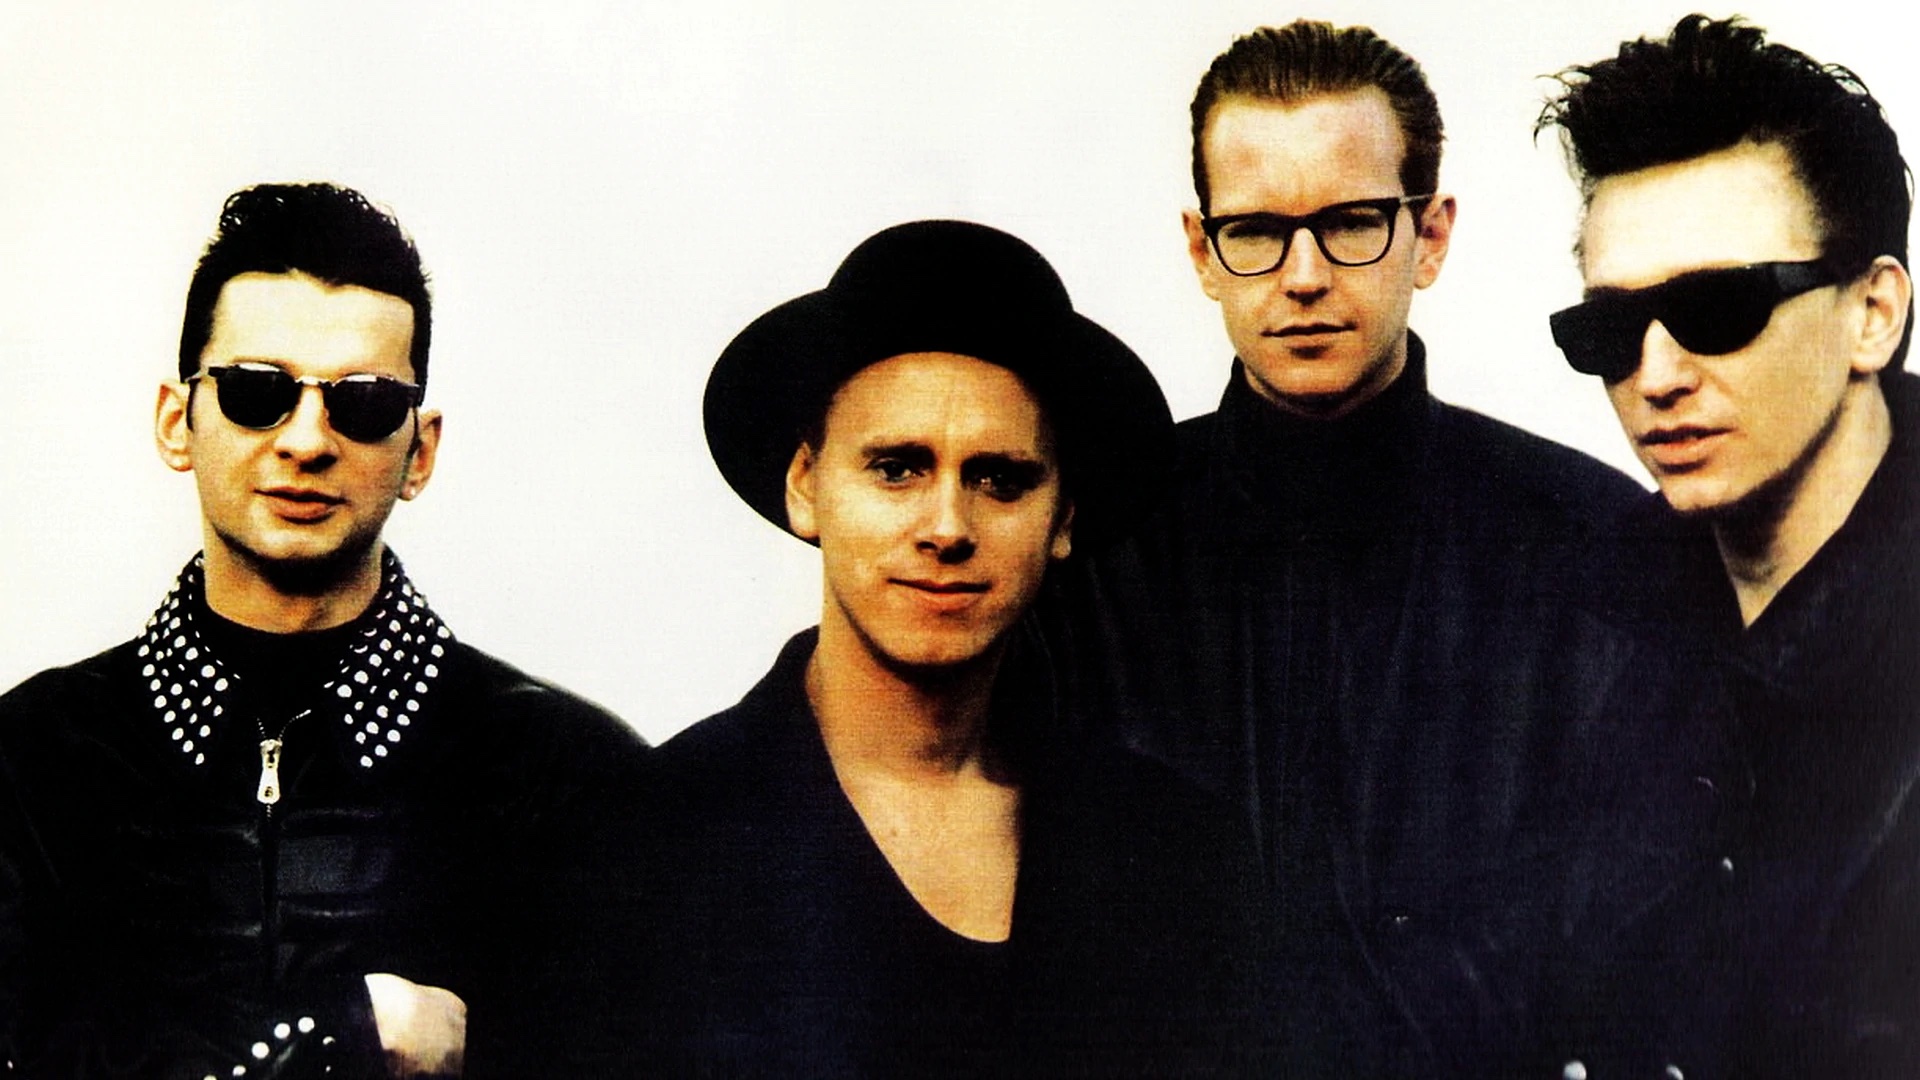 Never Let Me Down Again: The Story Behind Depeche Mode’s Classic Song